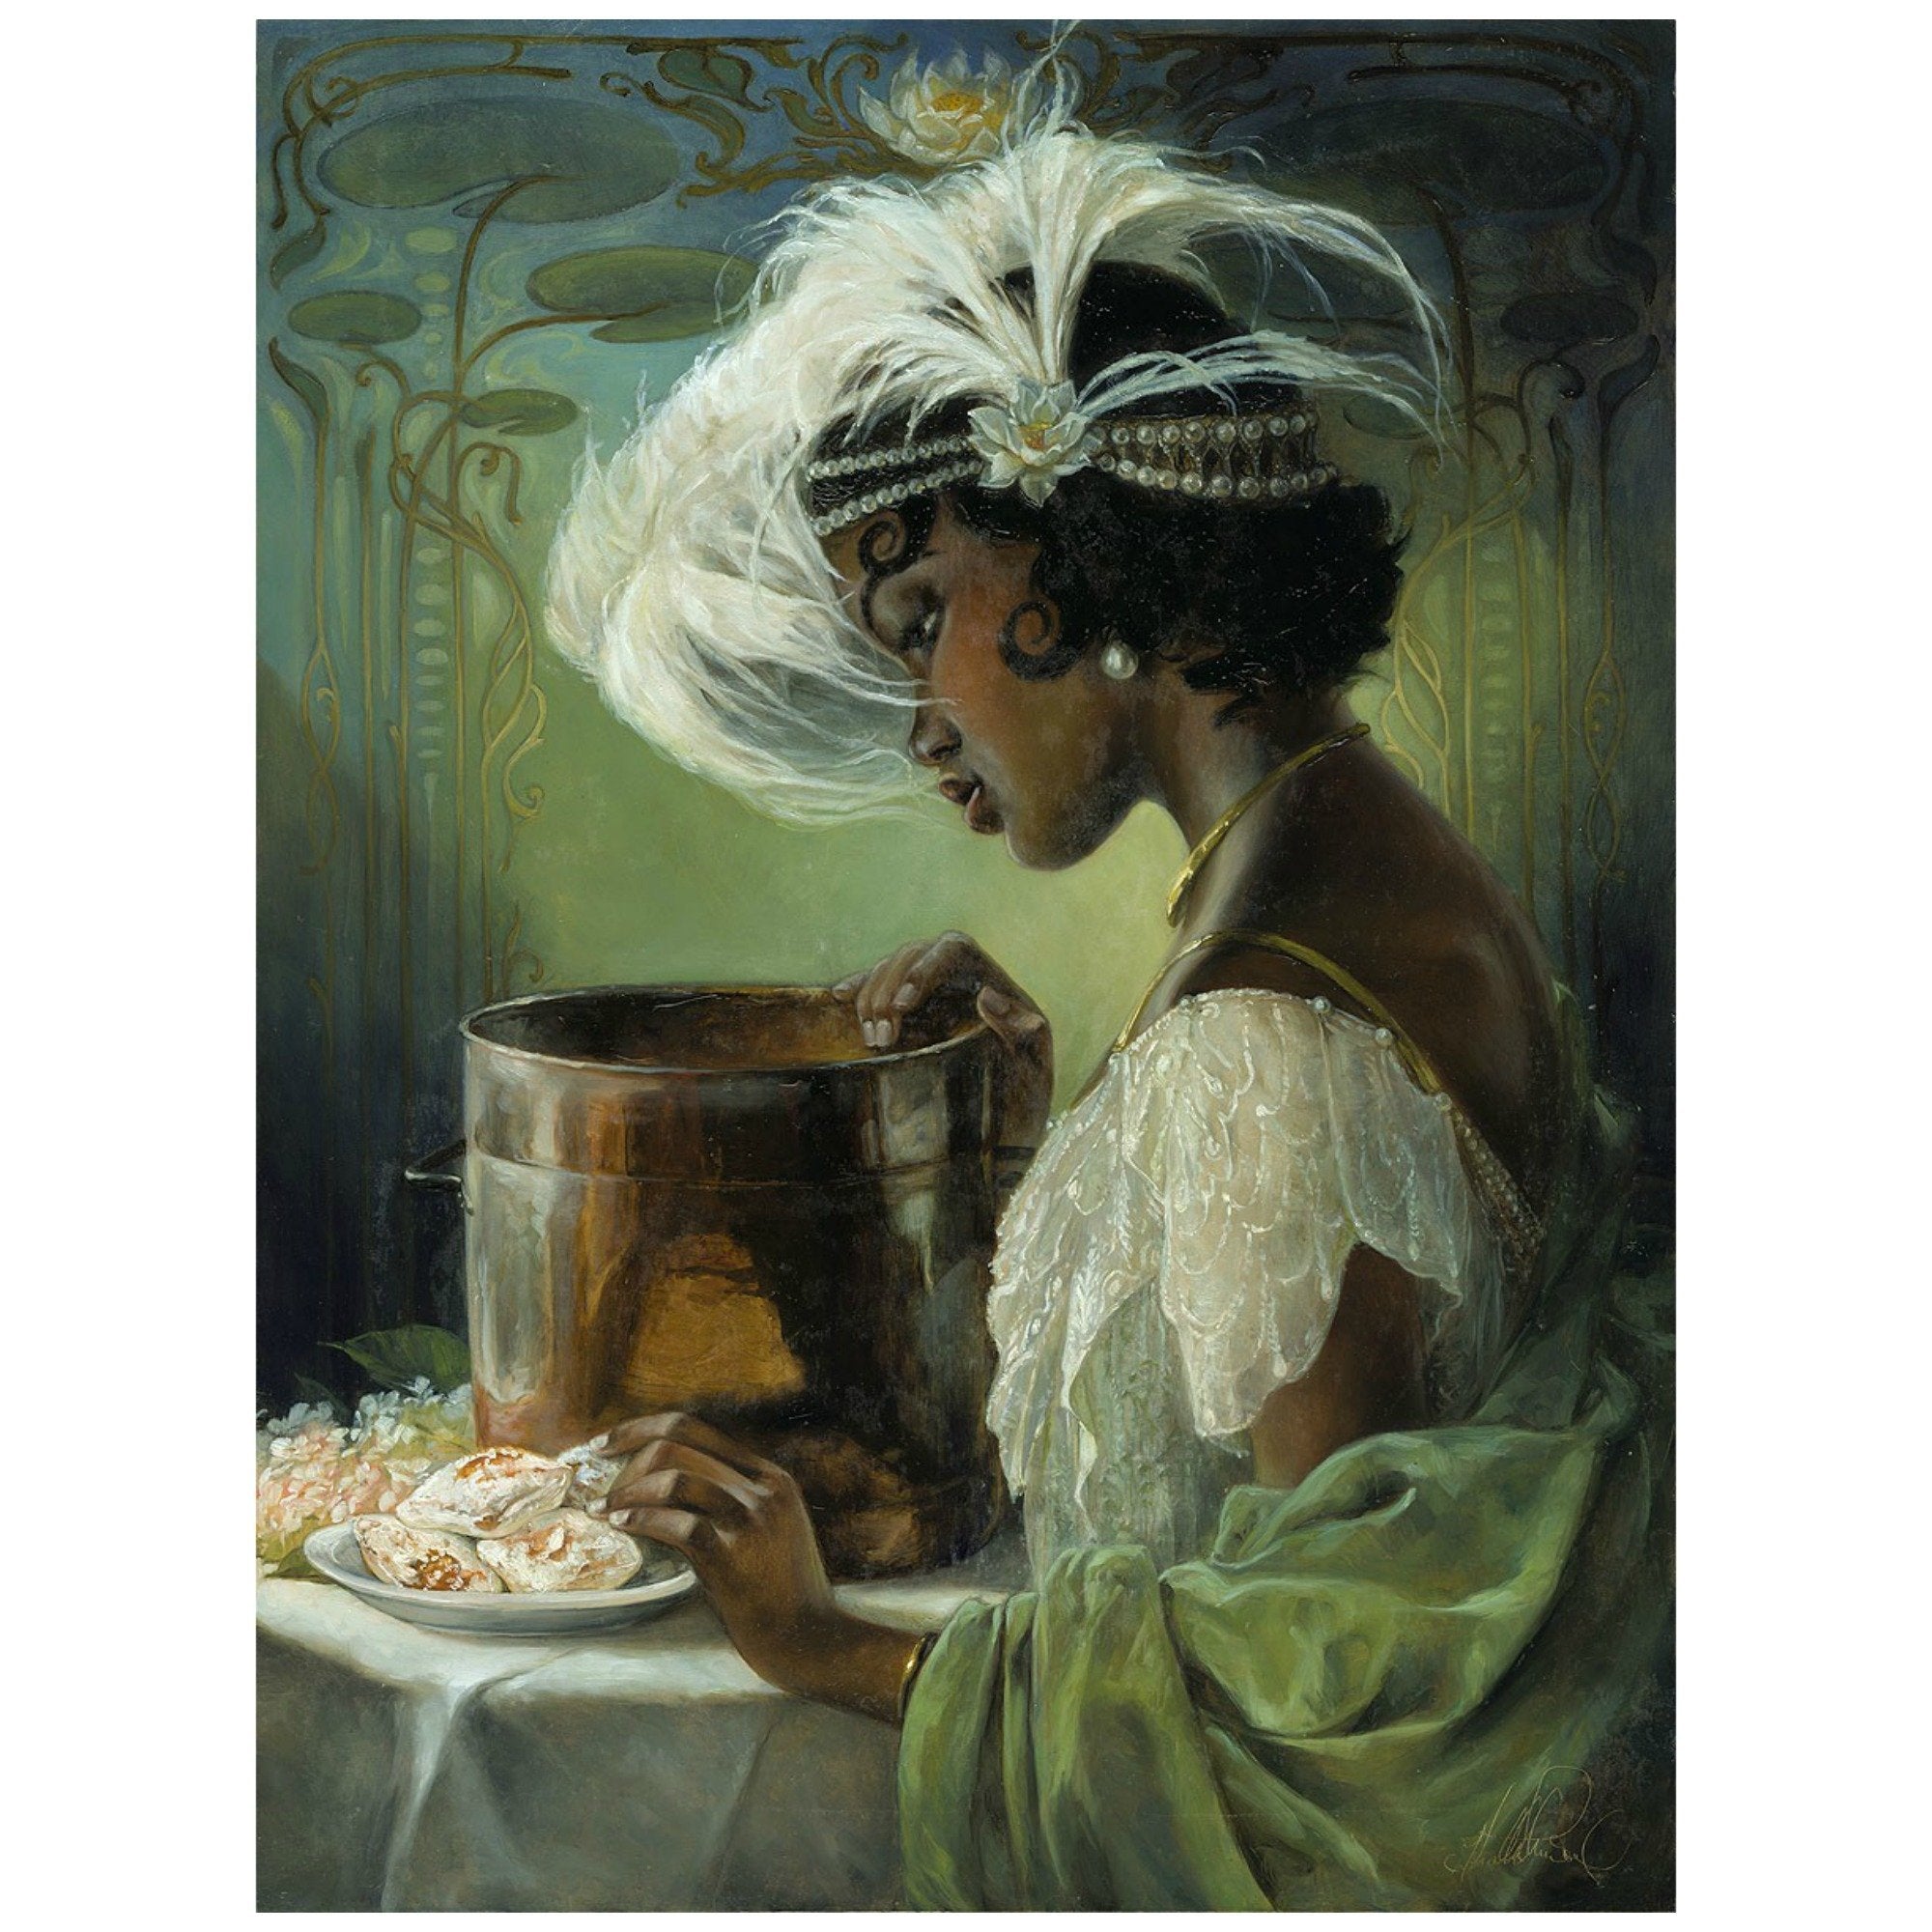 Tiana - in a realistic portrait from Disny's Princess and the Frog